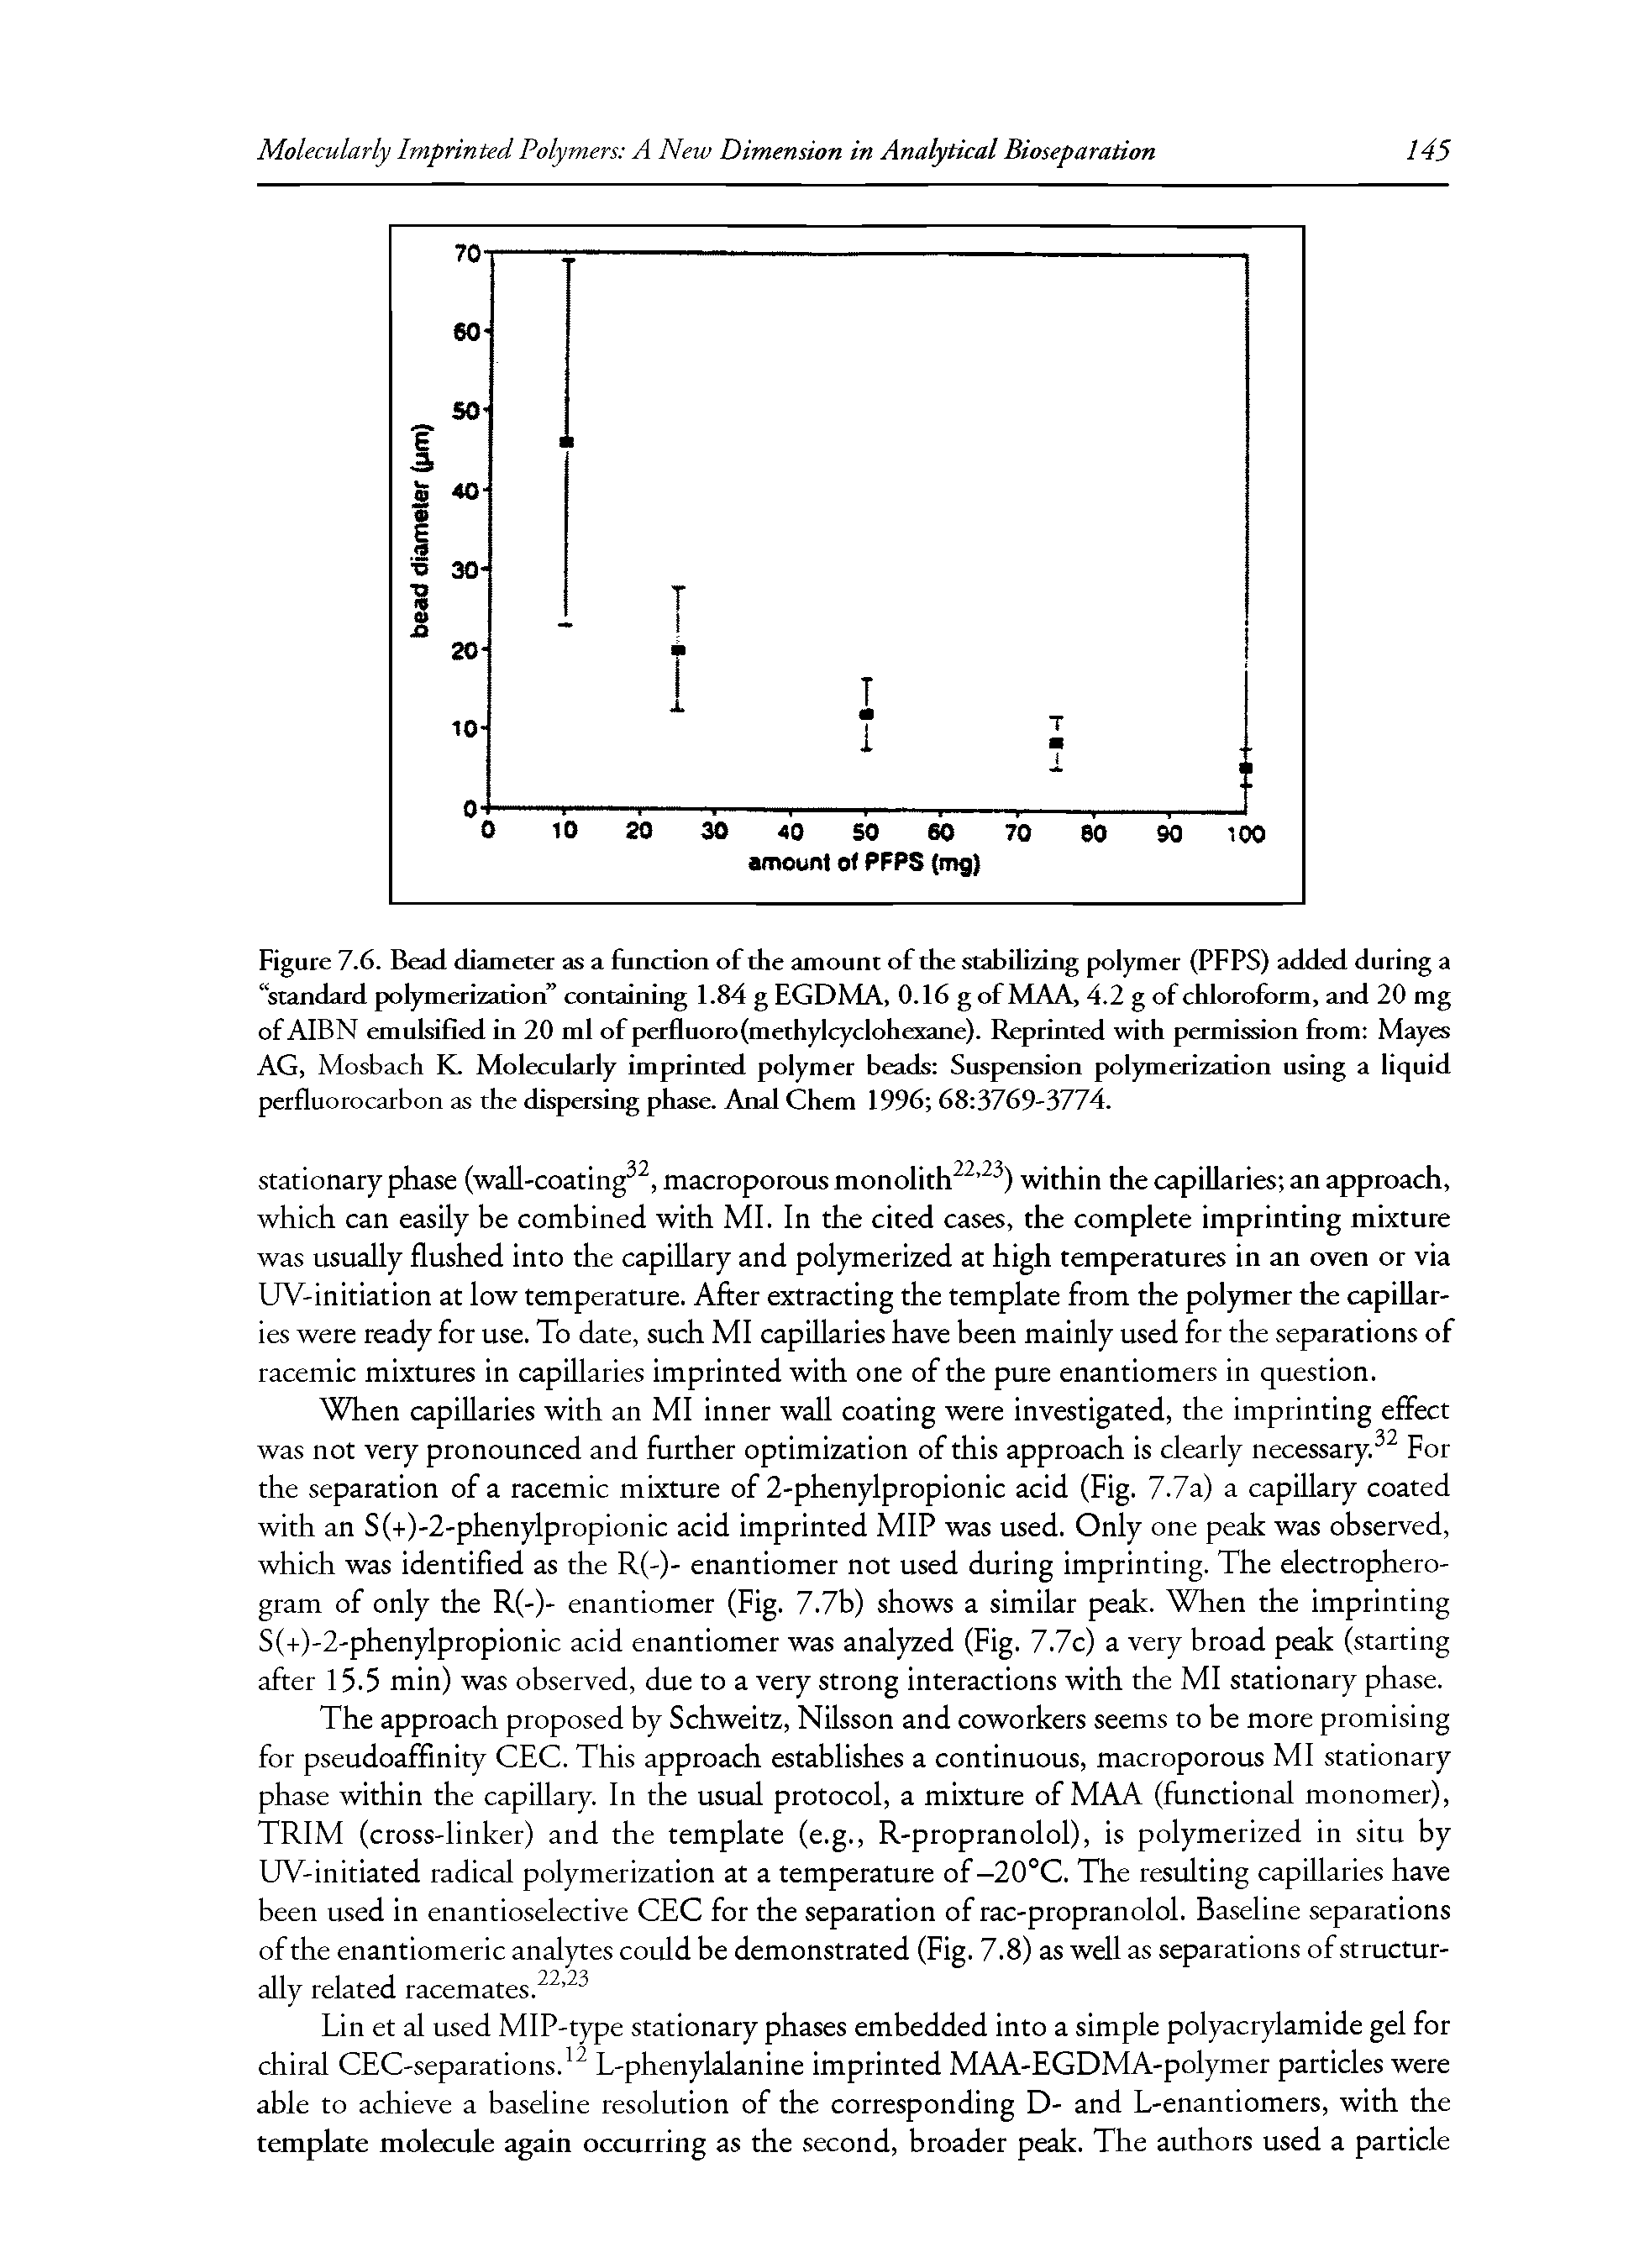 Figure 7.6. Beail diameter as a function of the amount of the stabilizing polymer (PFPS) added during a standard polymerization containing 1.84 g EGDMA, 0.16 gof MAA, 4.2 g of chloroform, and 20 mg of AIBN emulsified in 20 ml of perfluoro(methylcyclohexane). Reprinted with permission from Mayes AG, Mosbach K. Molecularly imprinted polymer beads Suspension polymerization using a liquid perfluorocarbon as the dispersing phase. Anal Chem 1996 68 3769-3774.